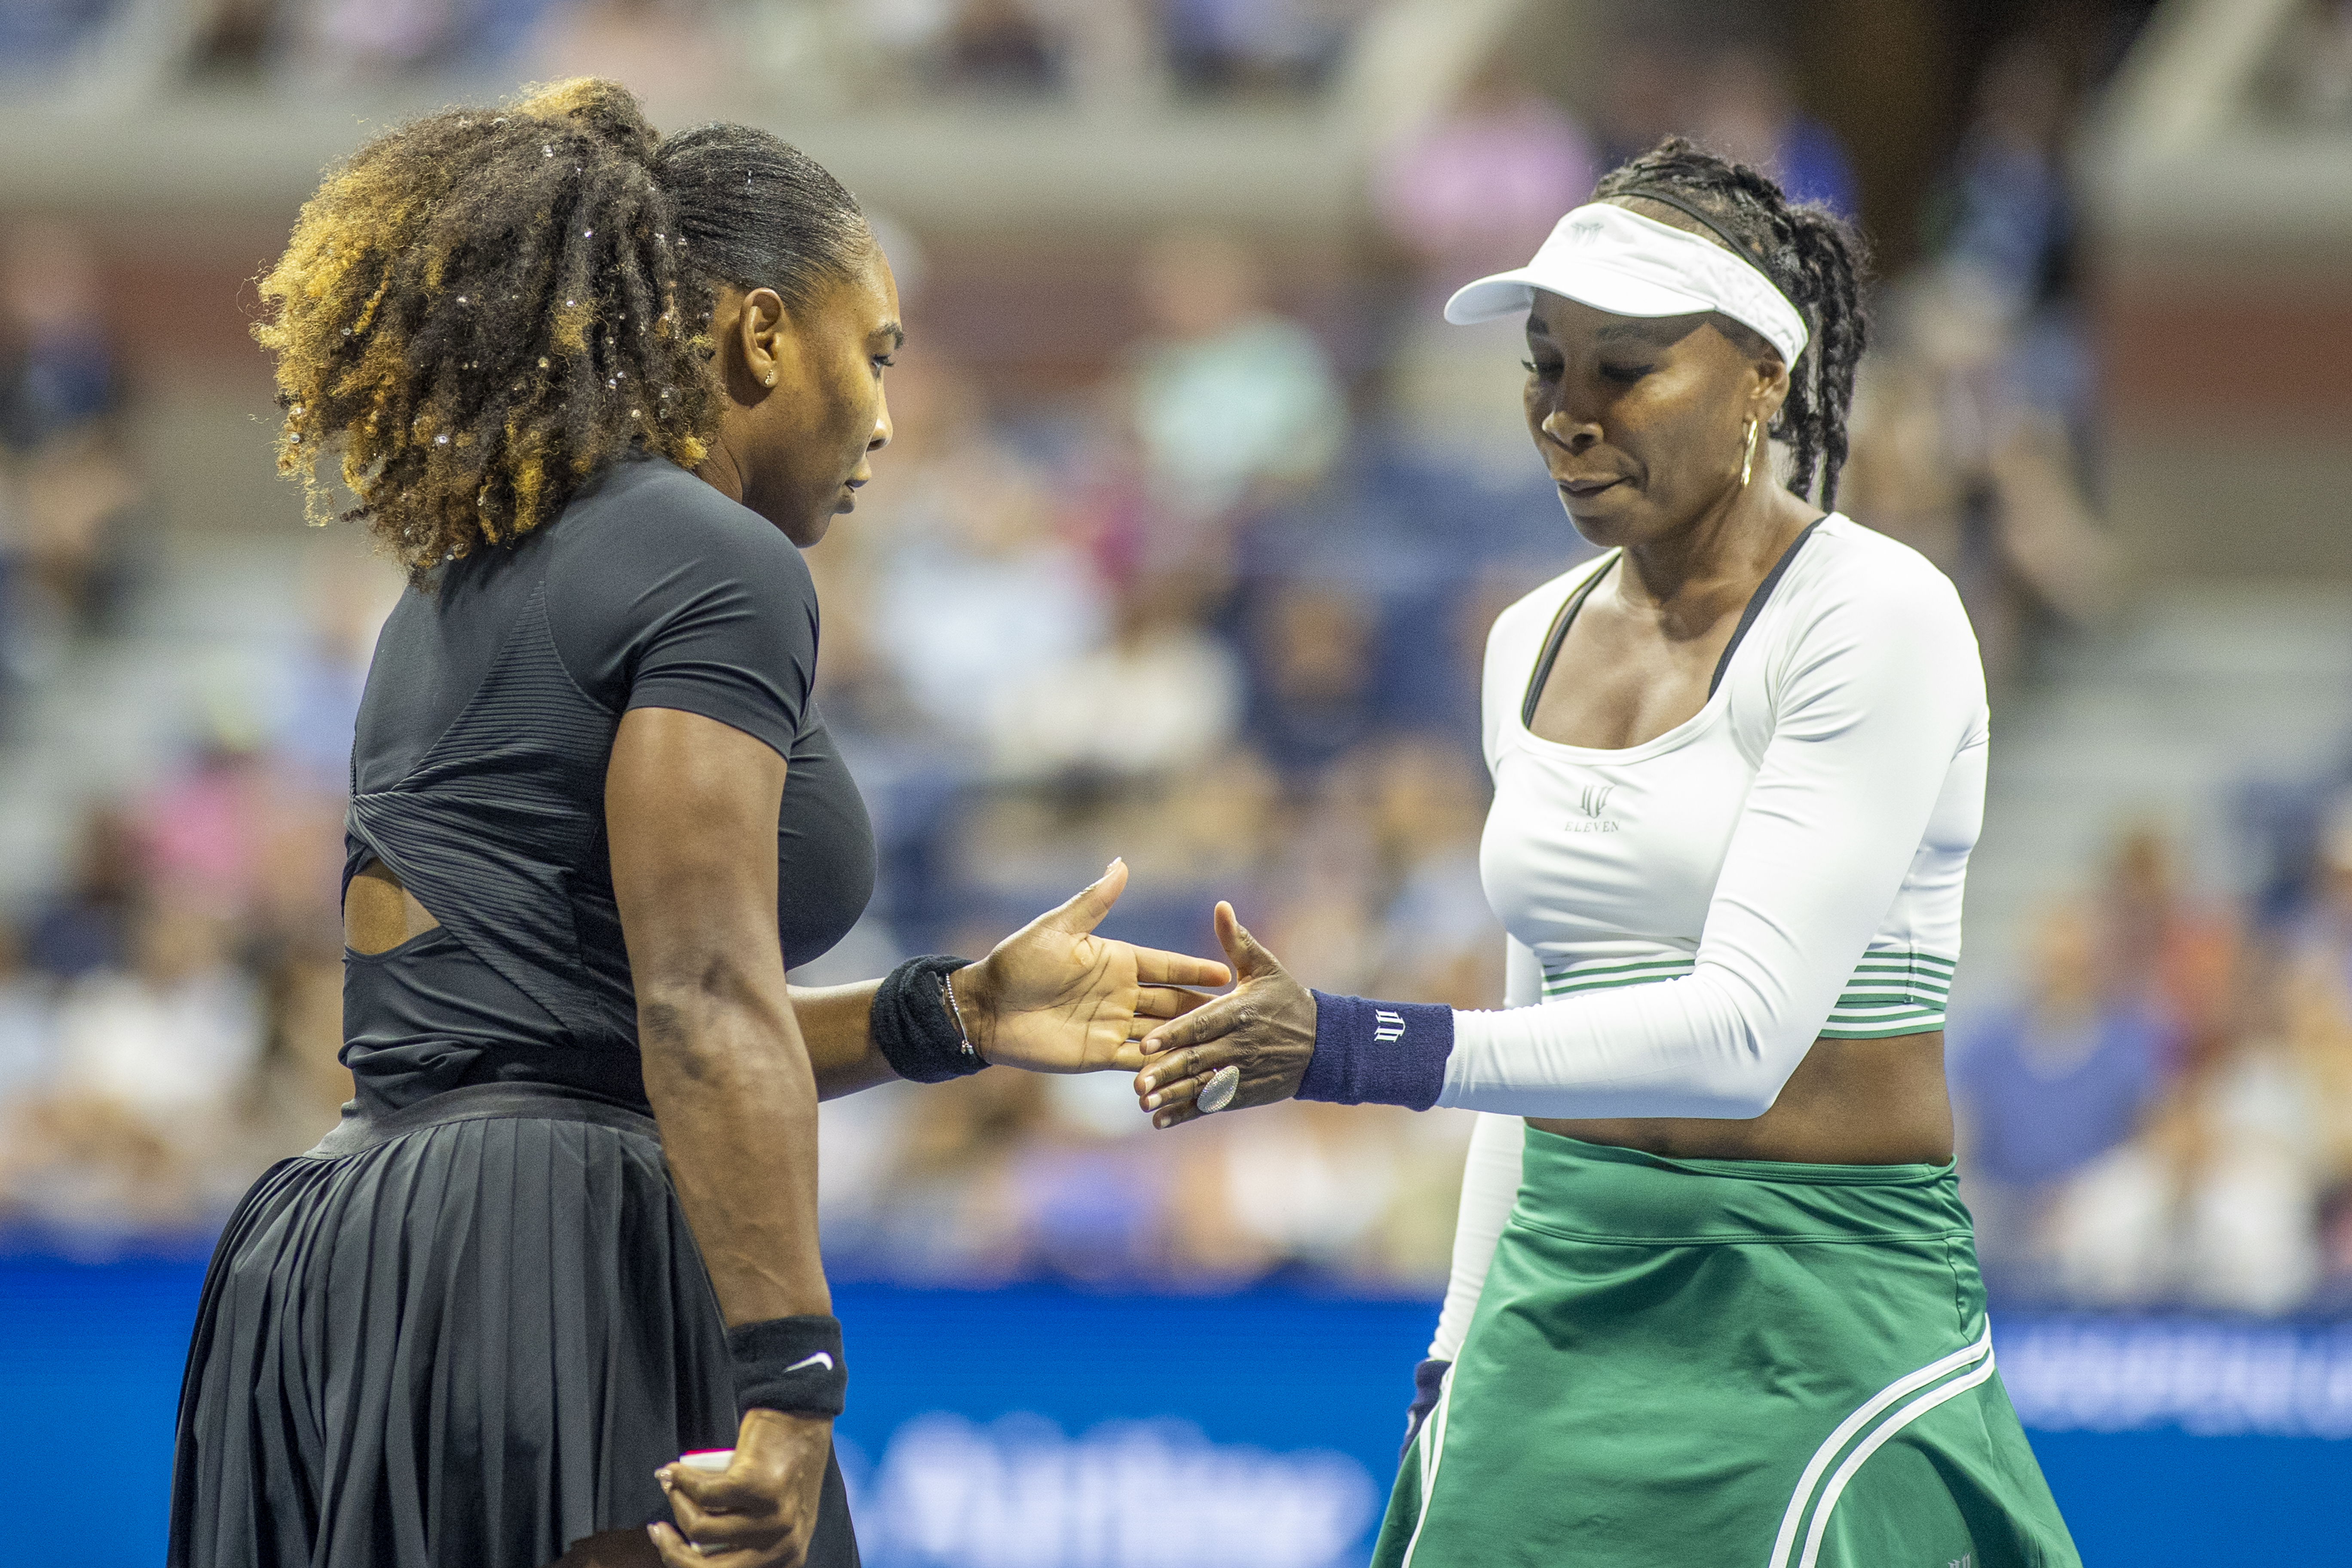 Serena Williams and Venus Williams during the US Open Tennis Championship 2022 on September 1st 2022 in Flushing, Queens, New York City. | Source: Getty Images